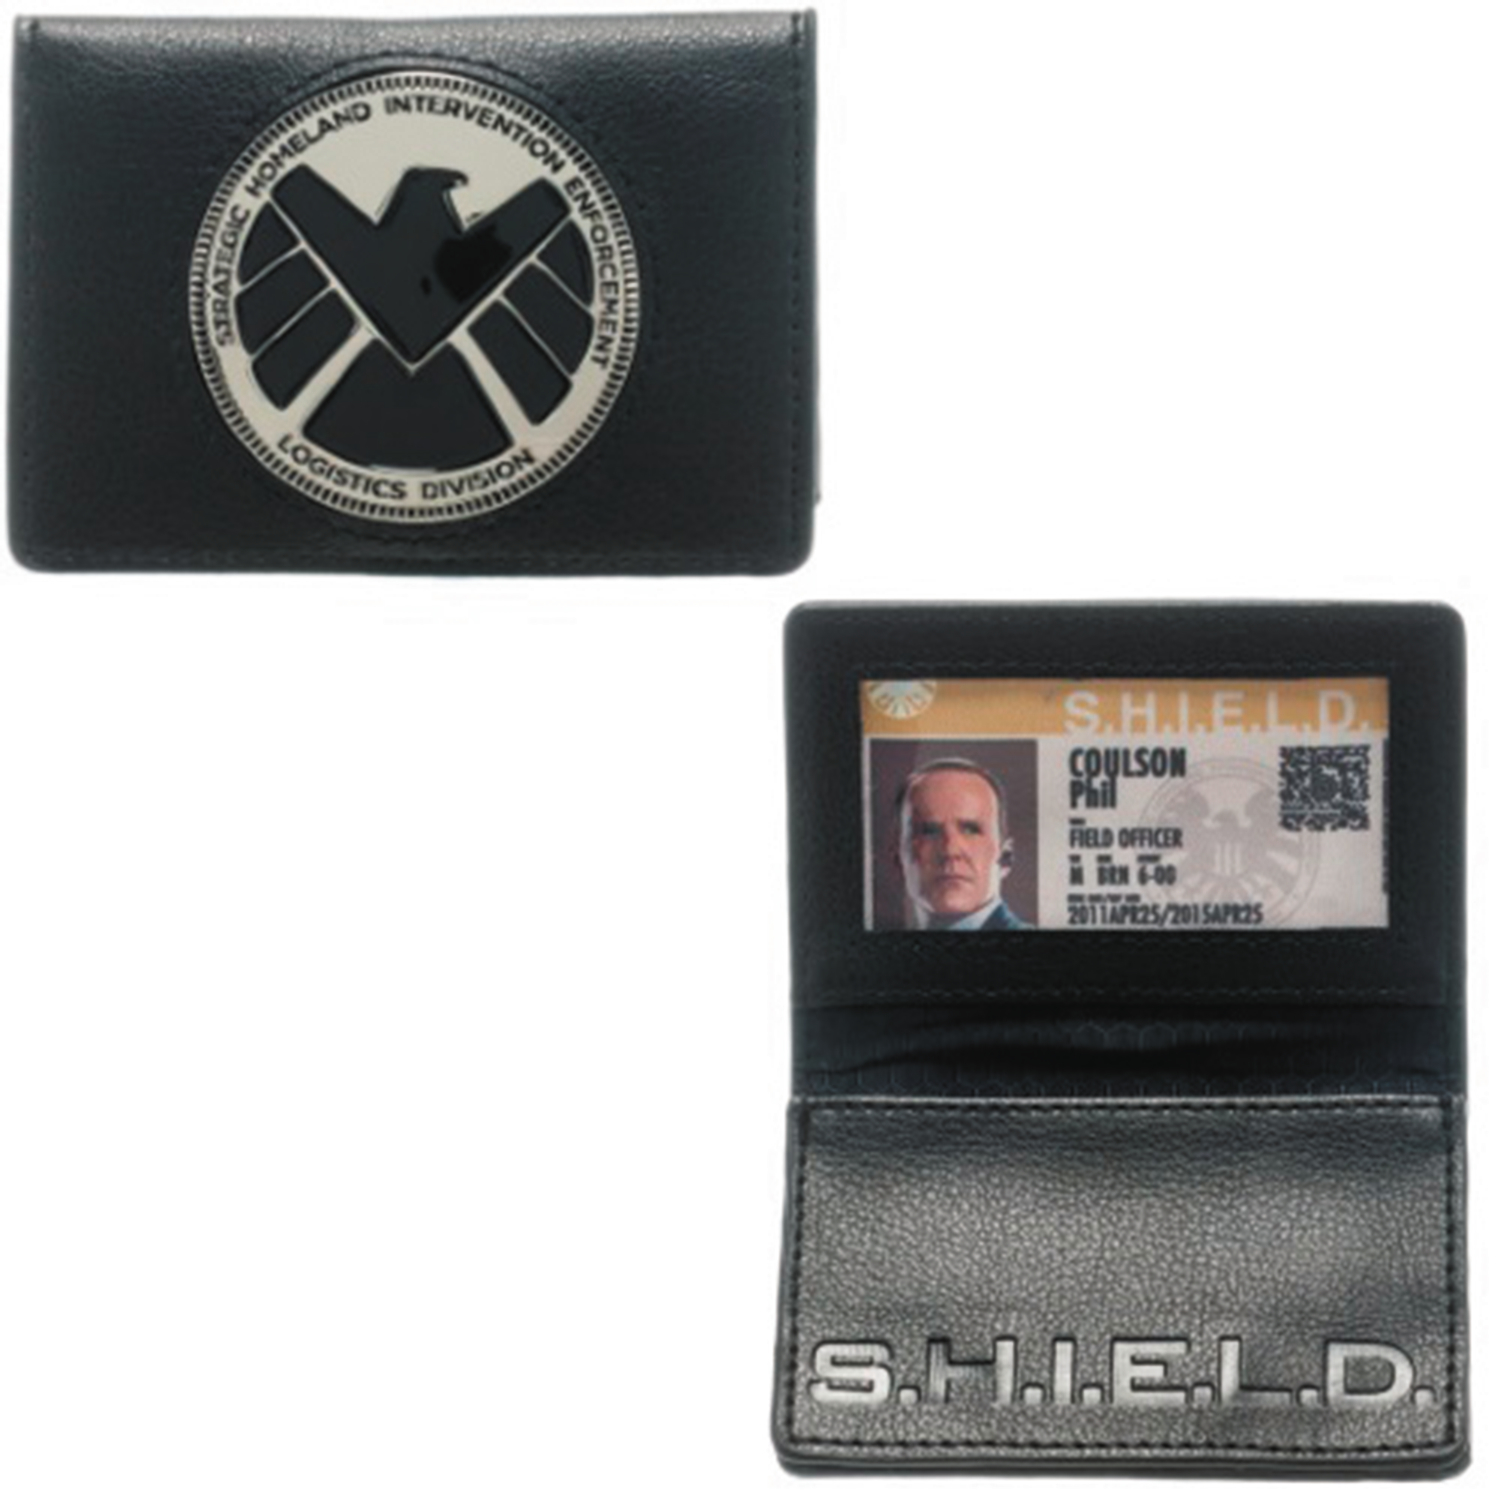 Avengers Agents of S.H.I.E.L.D Shield Skye Badge in Leather Wallet Holder Case 